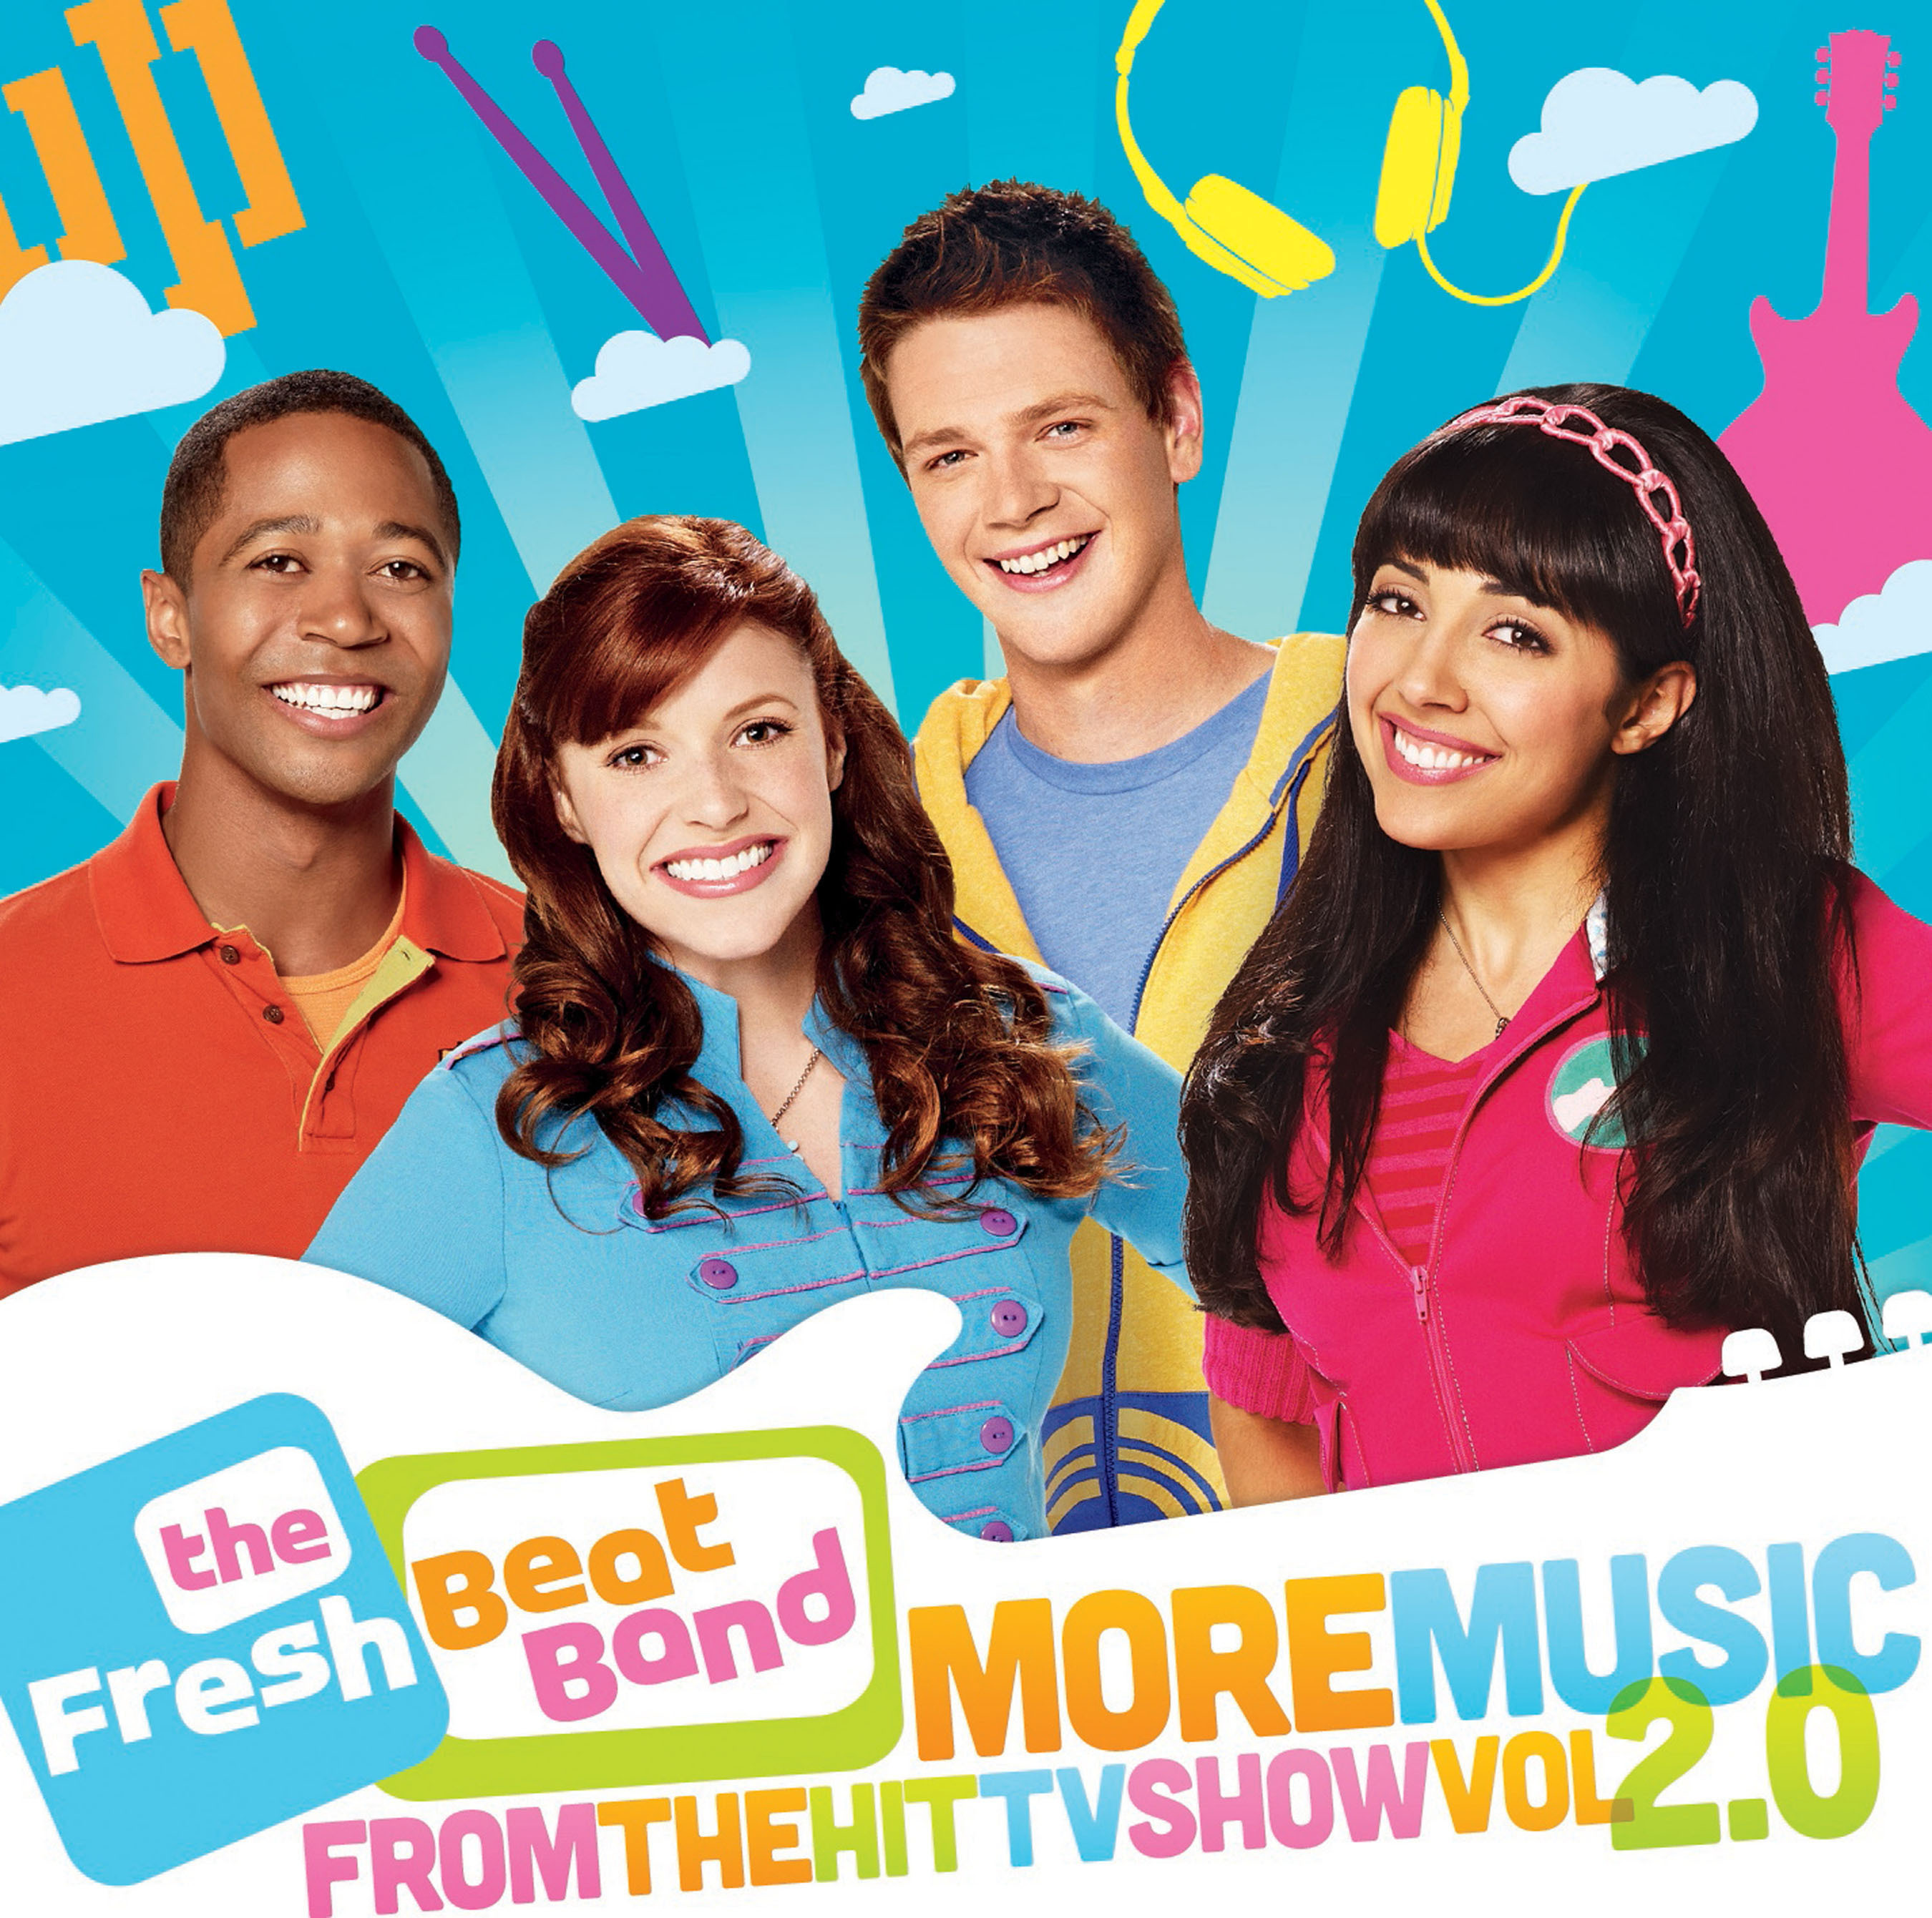 Nickelodeon To Release The Fresh Beat Band: More Music From The Hit TV Show Vol 2.0 October 9